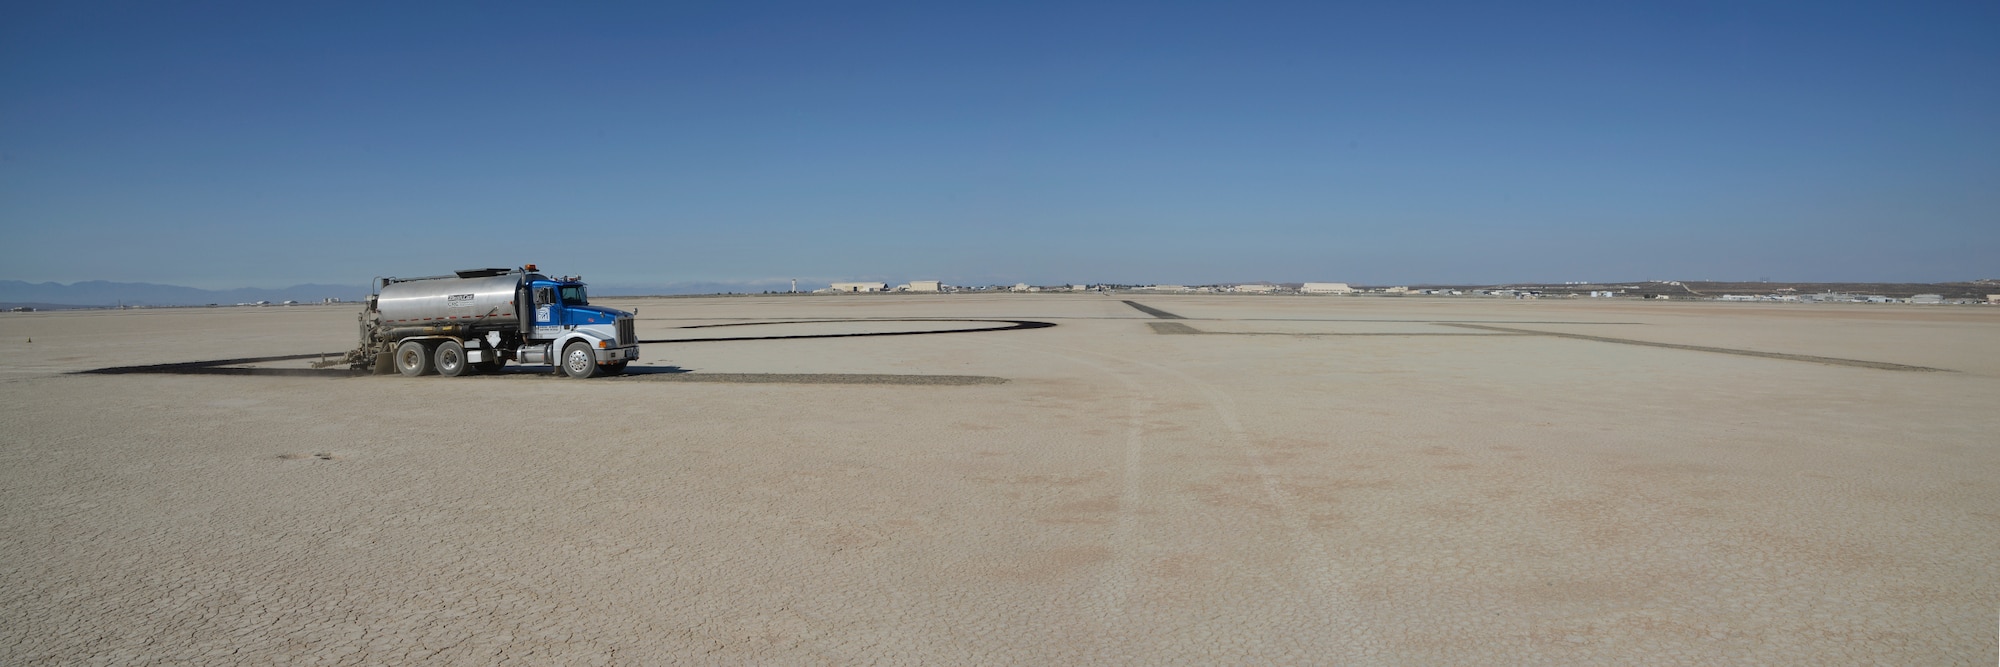 The 412th Civil Engineering Group, 412th Operations Support Squadron and contract company EM Oil, began the annual lakebed restriping July 7. Runway 06/24 receives a fresh coat of oil ensuring the visibility of runway designator “24.” (U.S. Air Force photo by Rebecca Amber)